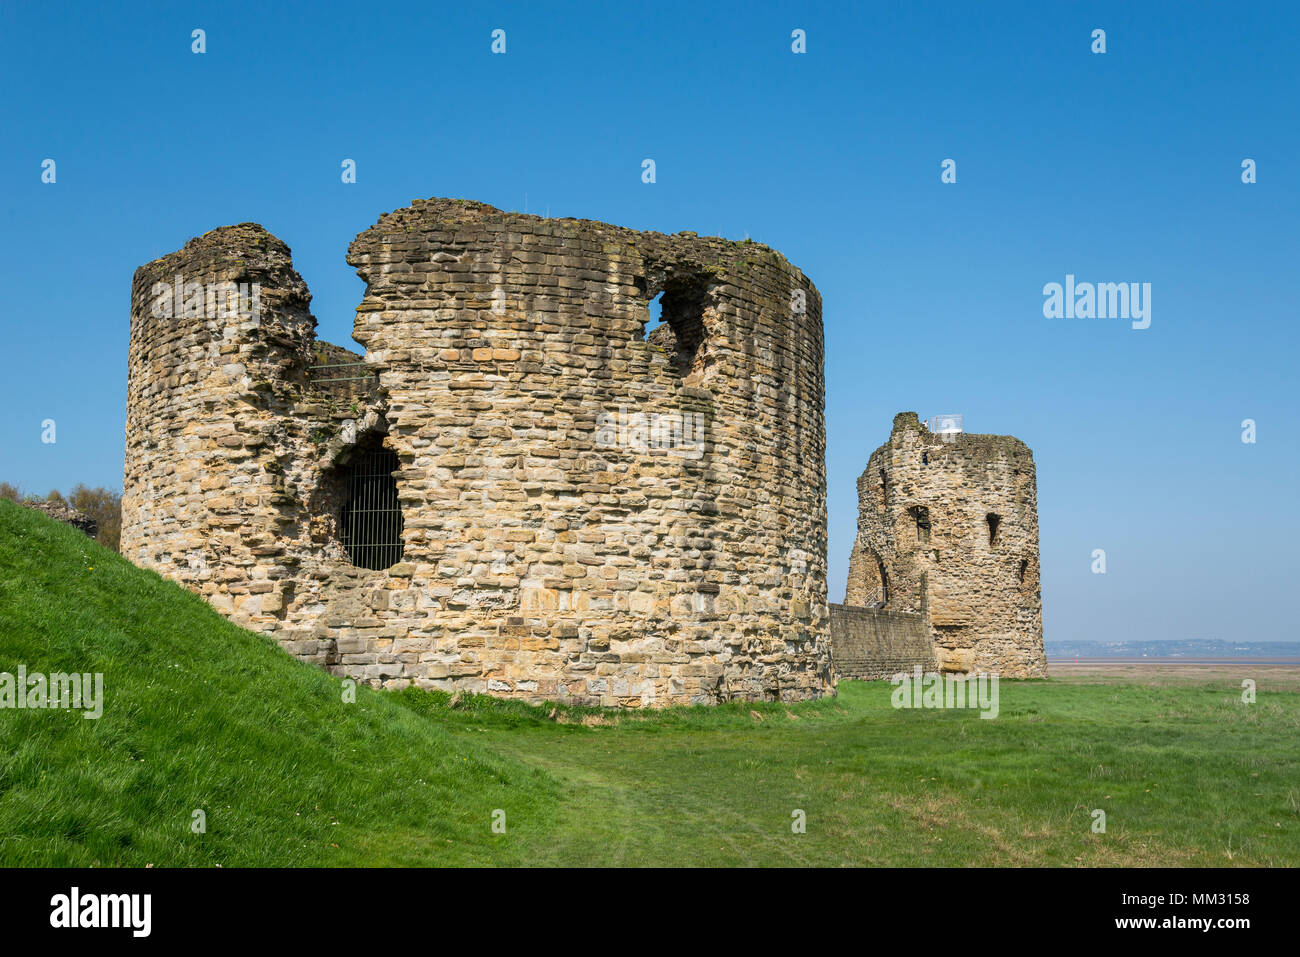 Ruins of Flint Castle beside the river Dee in Flintshire, North Wales. Circular 'Donjon' tower in the foreground. Stock Photo